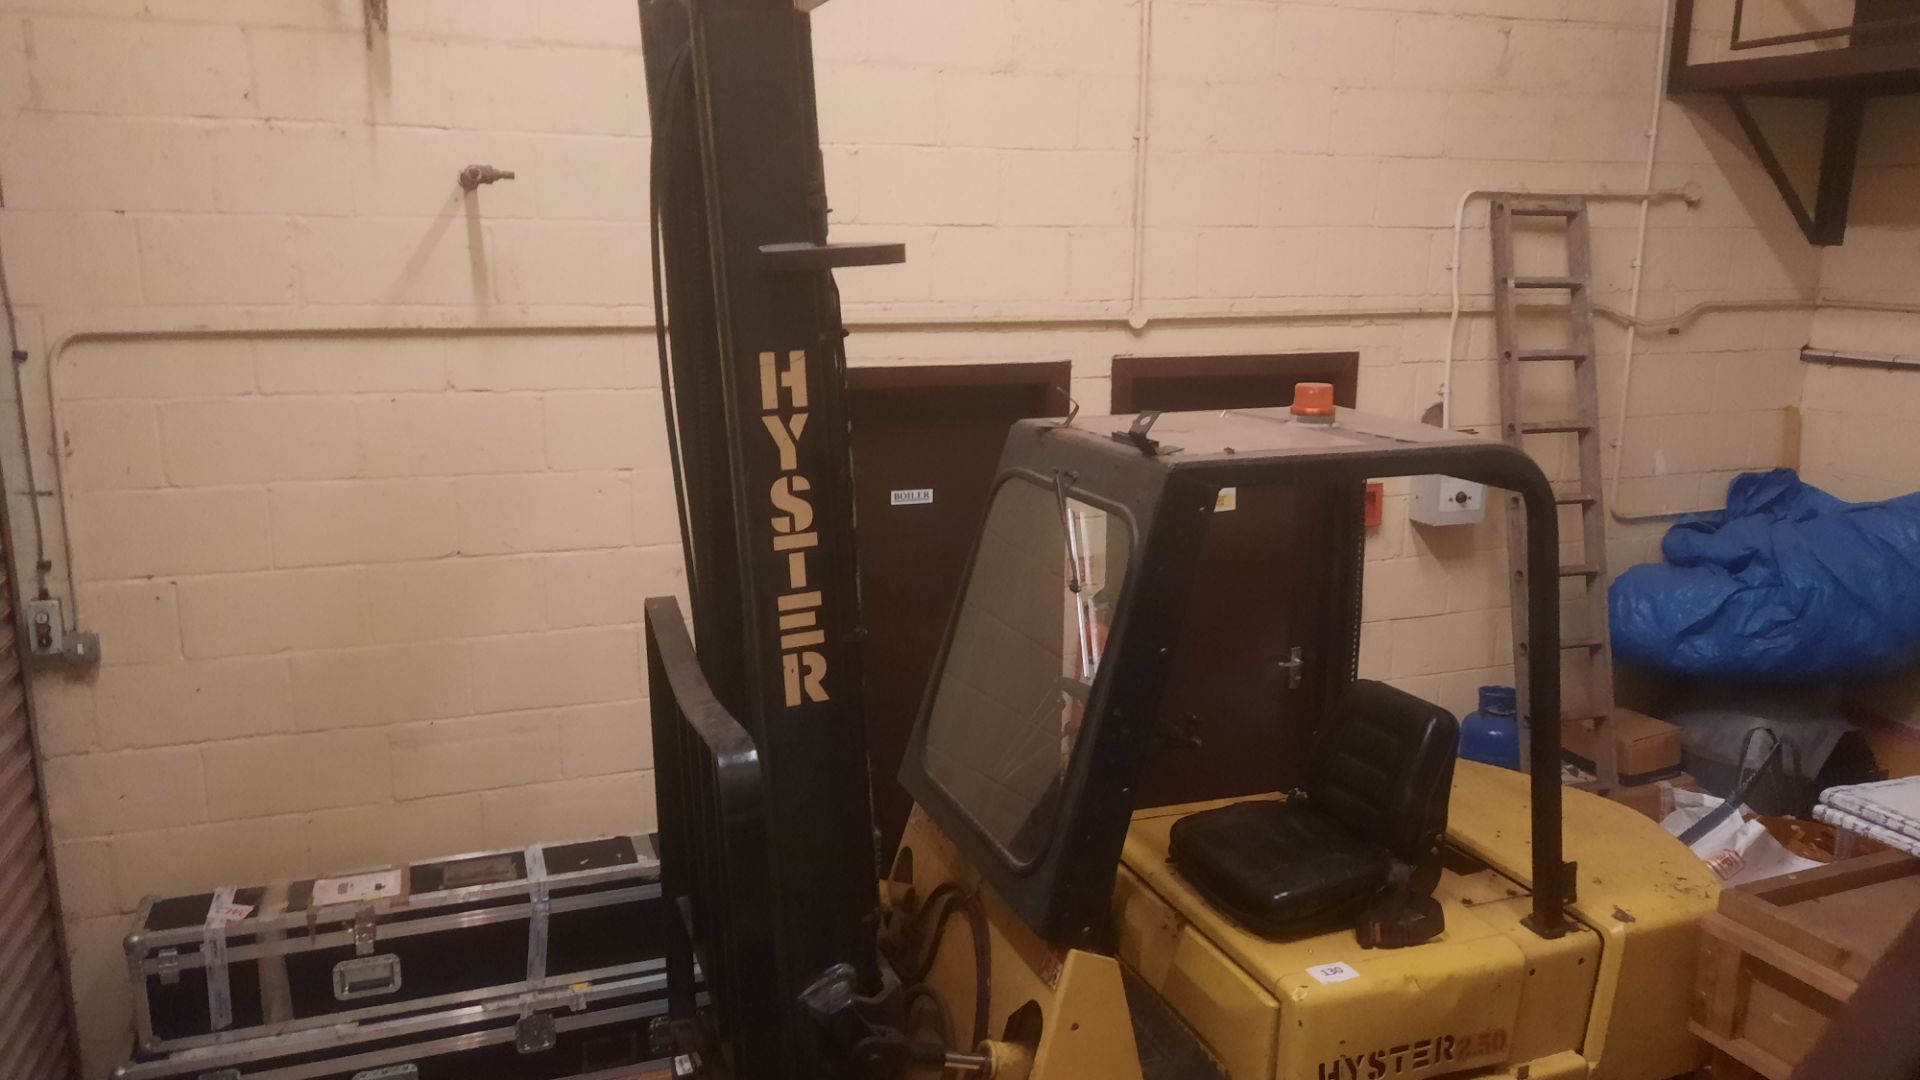 1: Hyster, 2.50XL, Forklift, Serial Number: A177B333 82K, Year of Manufacture: 1989